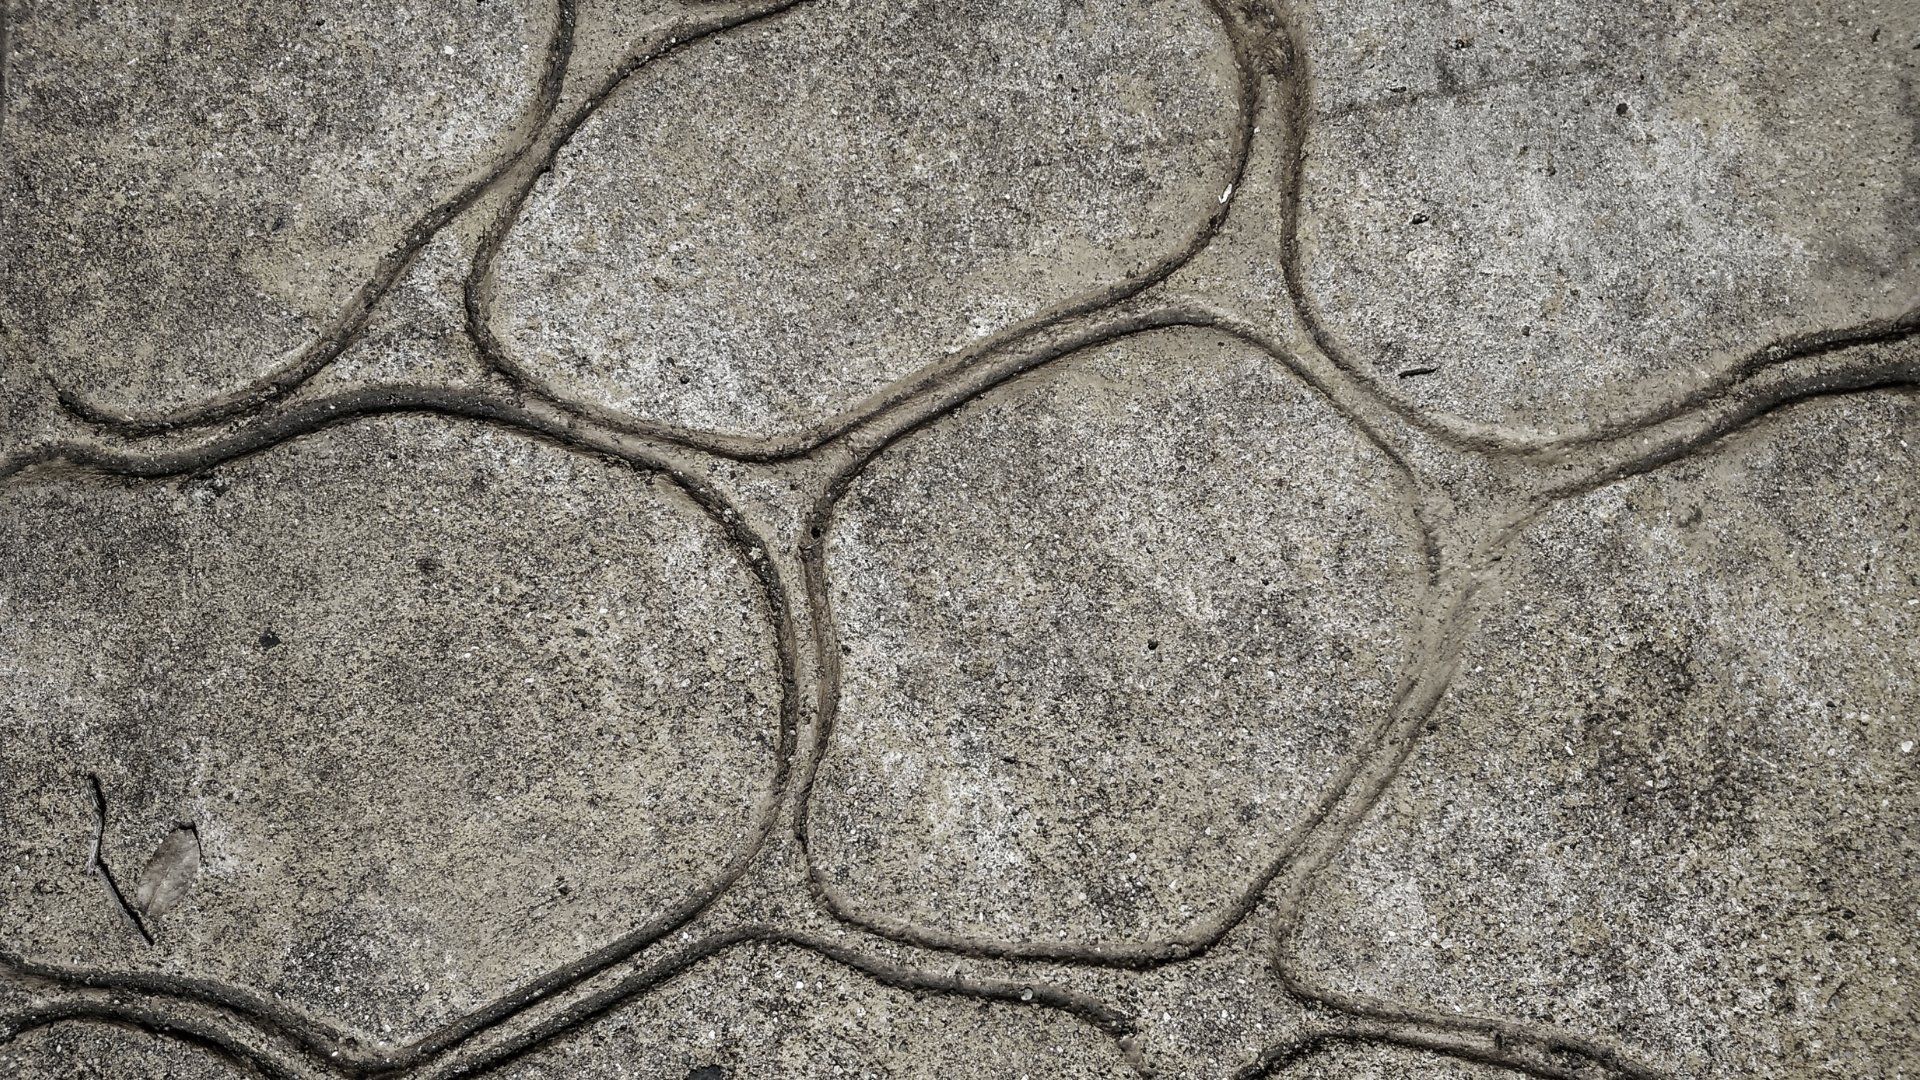 Close up picture of a grey stamped concrete design with circular patterns.